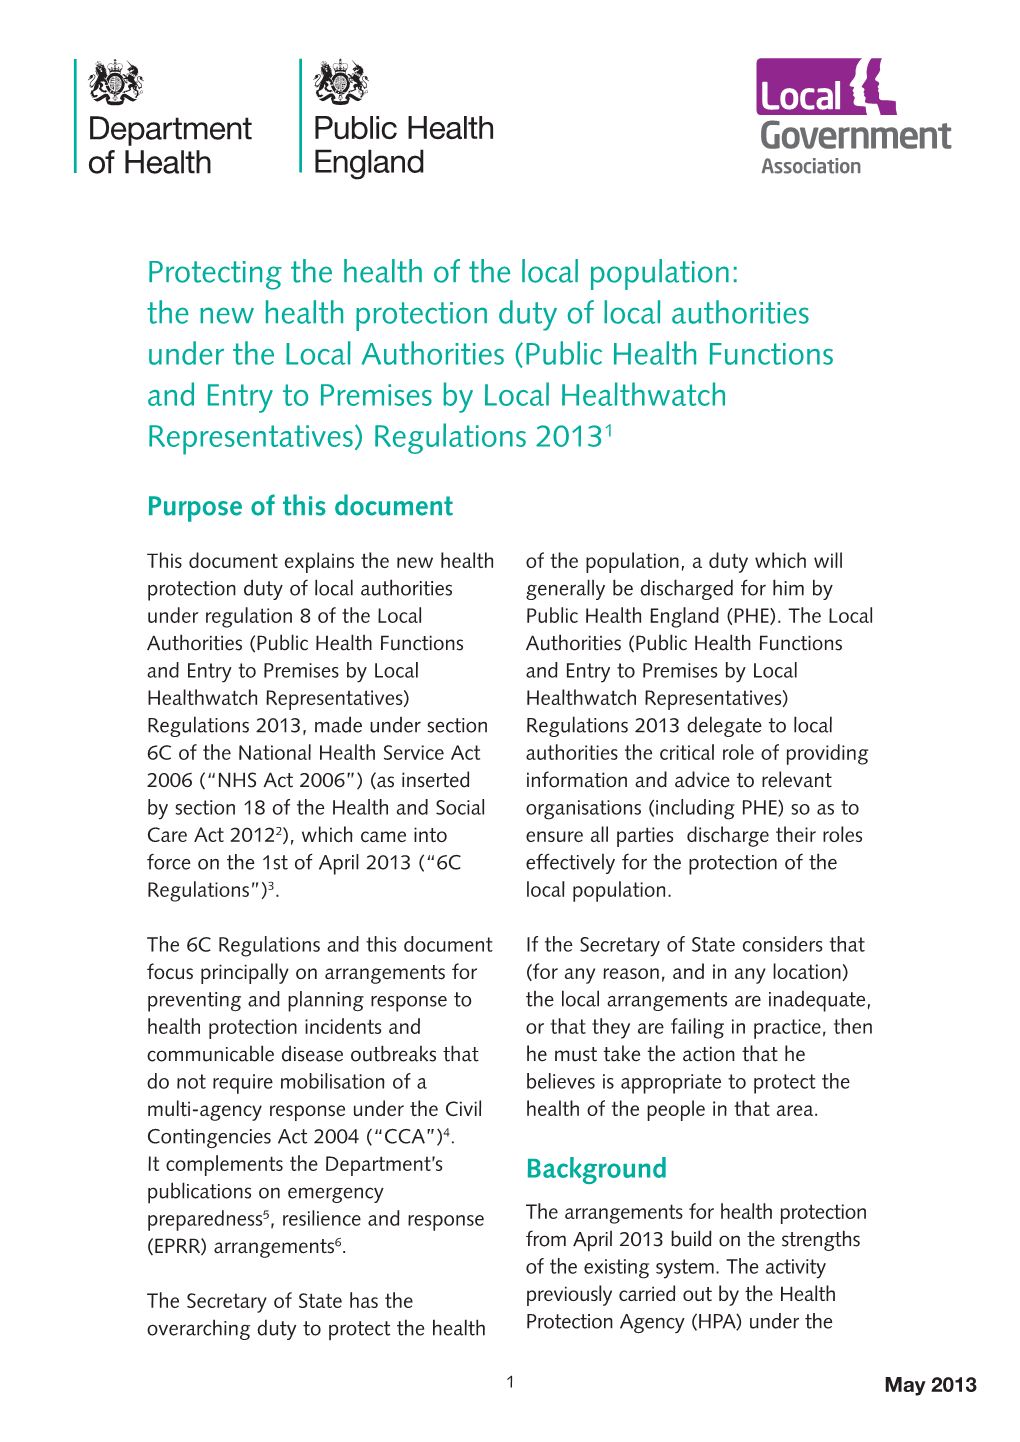 The New Health Protection Duty of Local Authorities